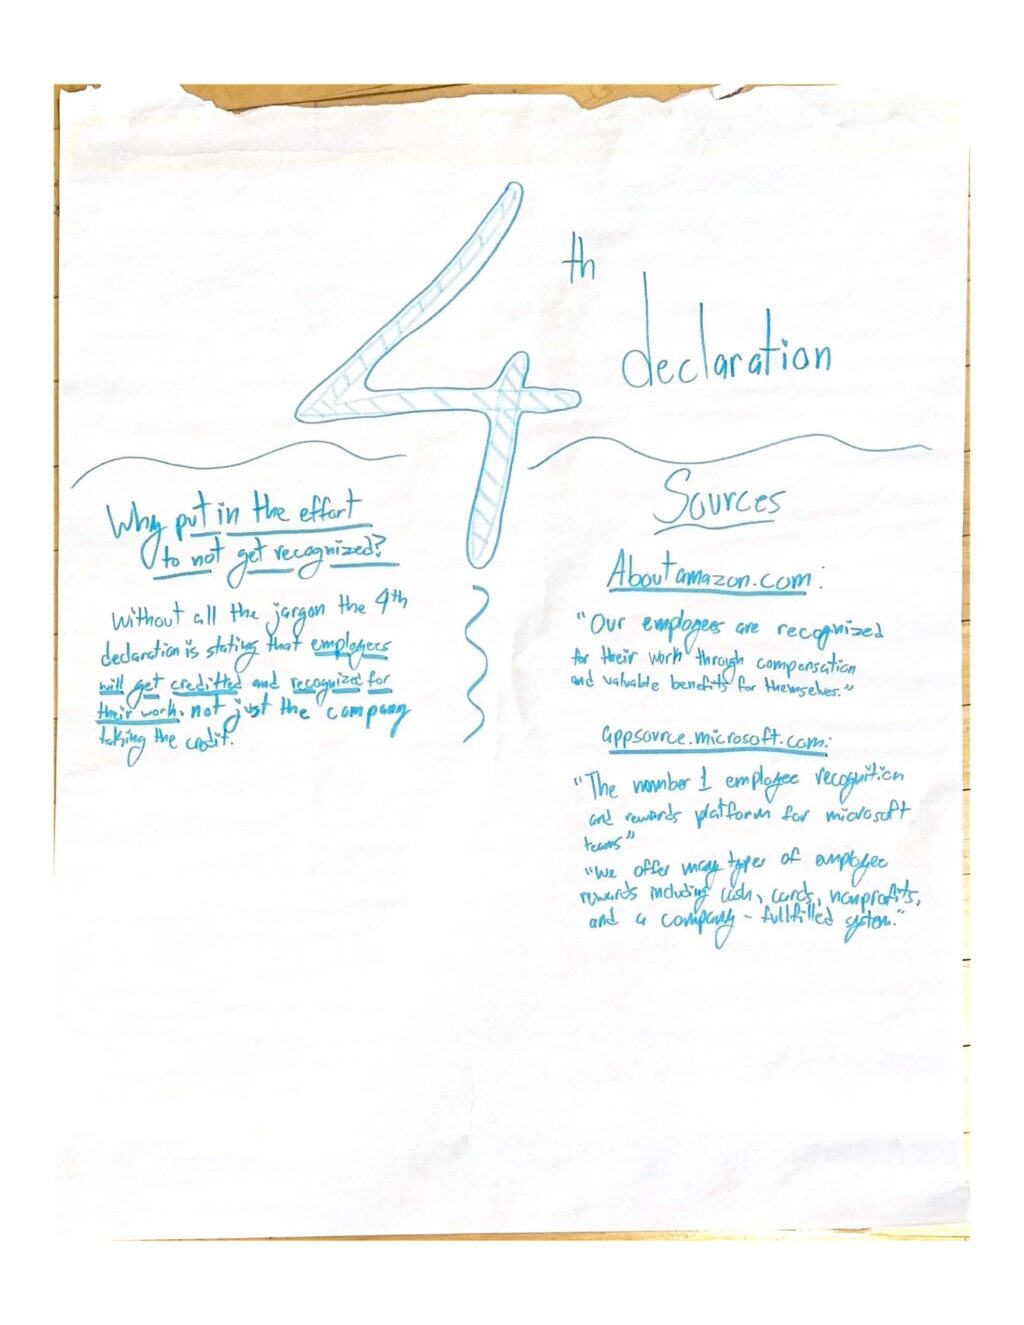 Handwritten note highlighting the basic ideas behind declaration four from the book, "The Mission Corporation: How contemporary capitalism can change the world one business at a time"